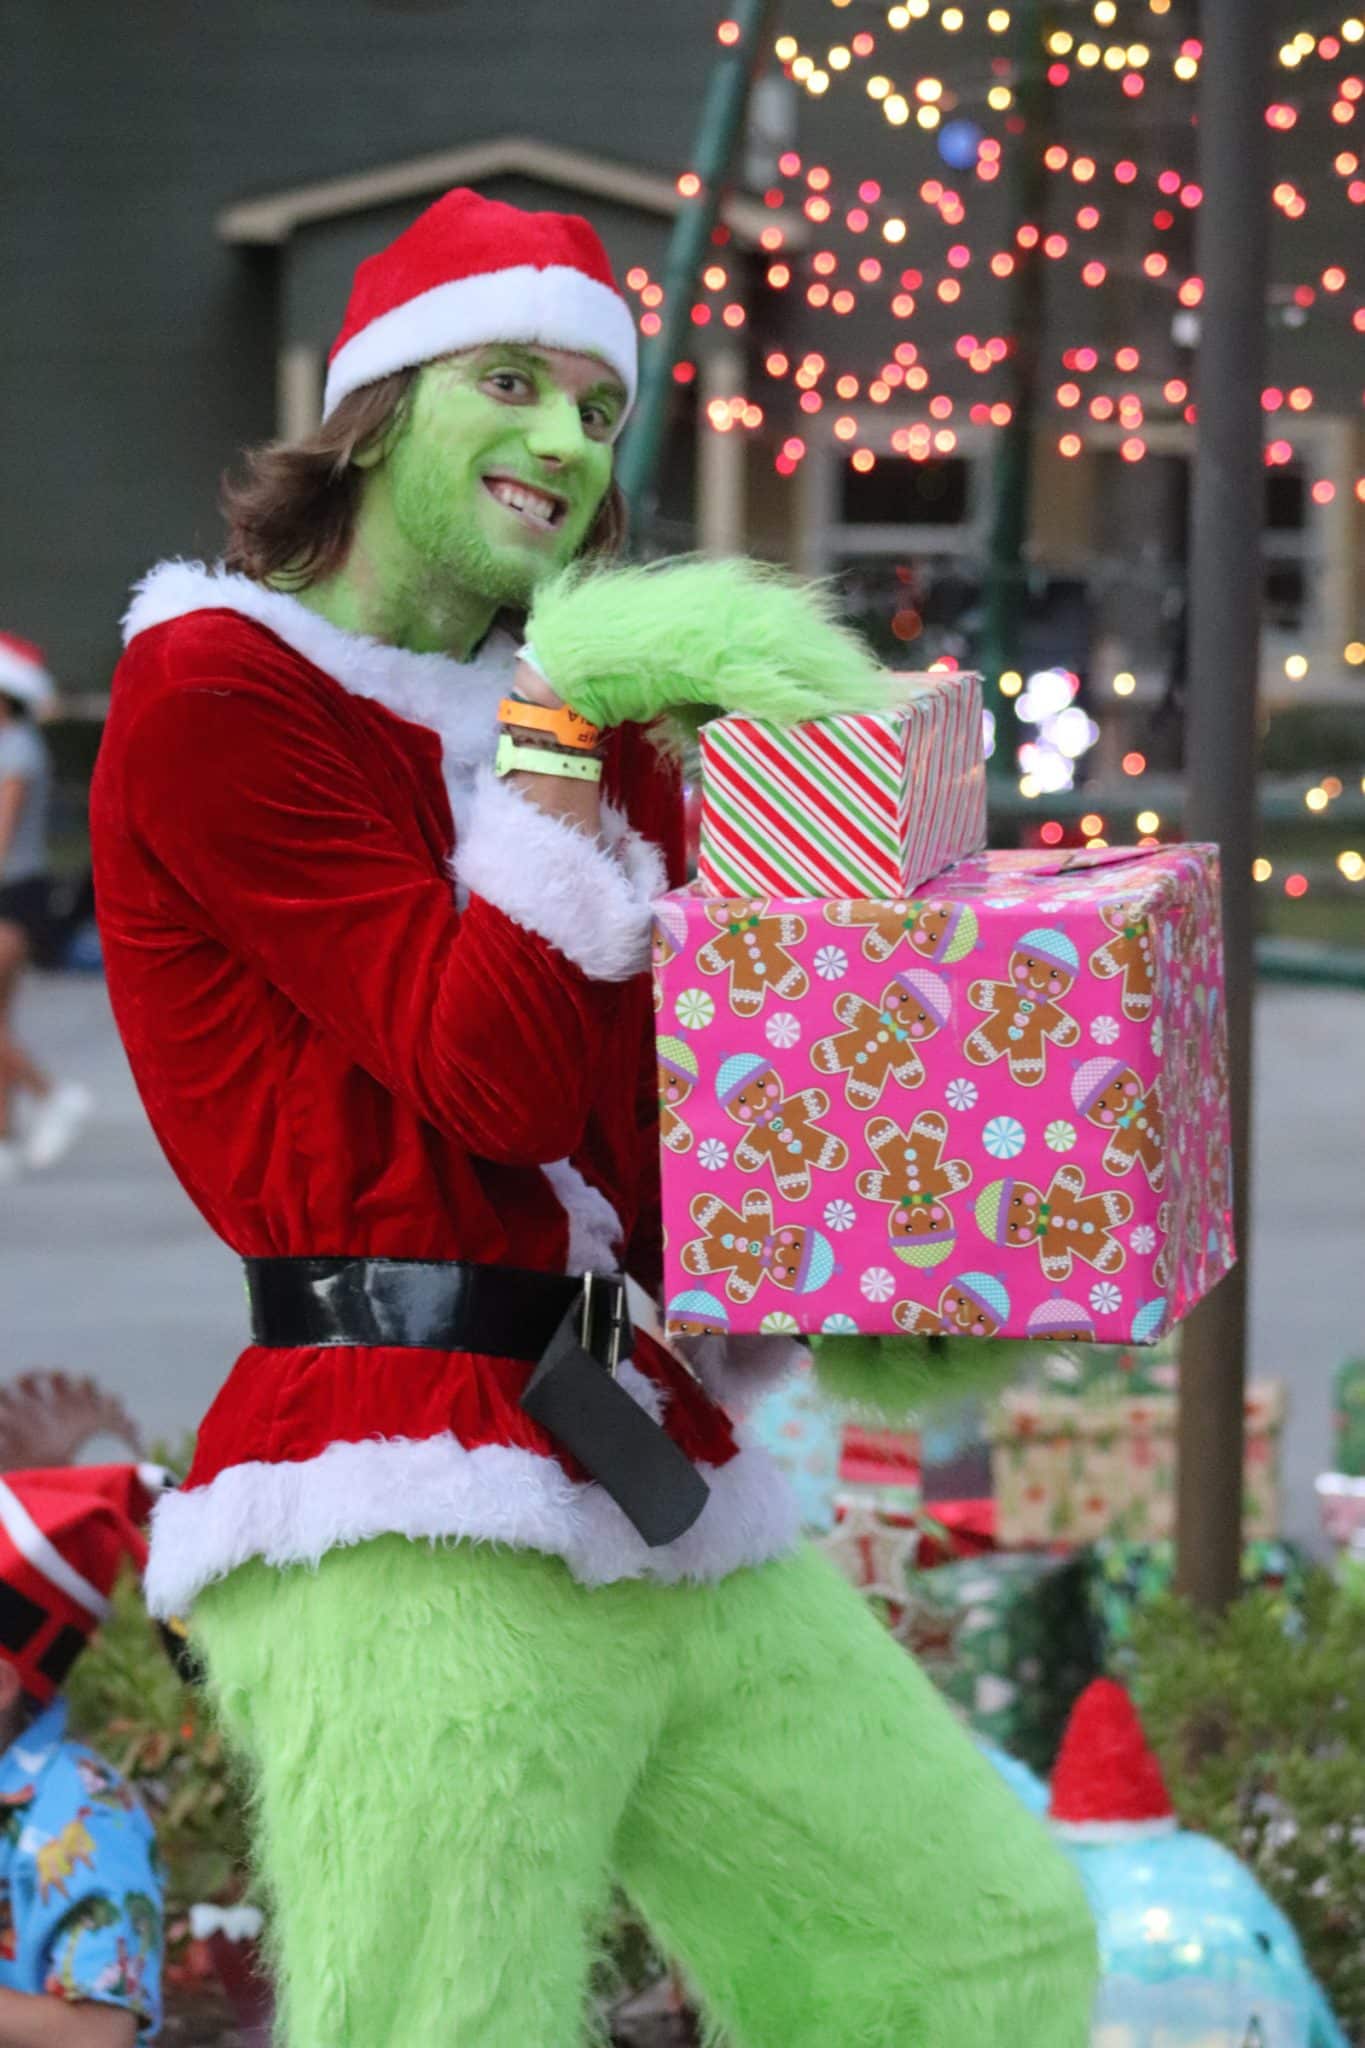 Camp Olympia counselor dressed as the Grinch.